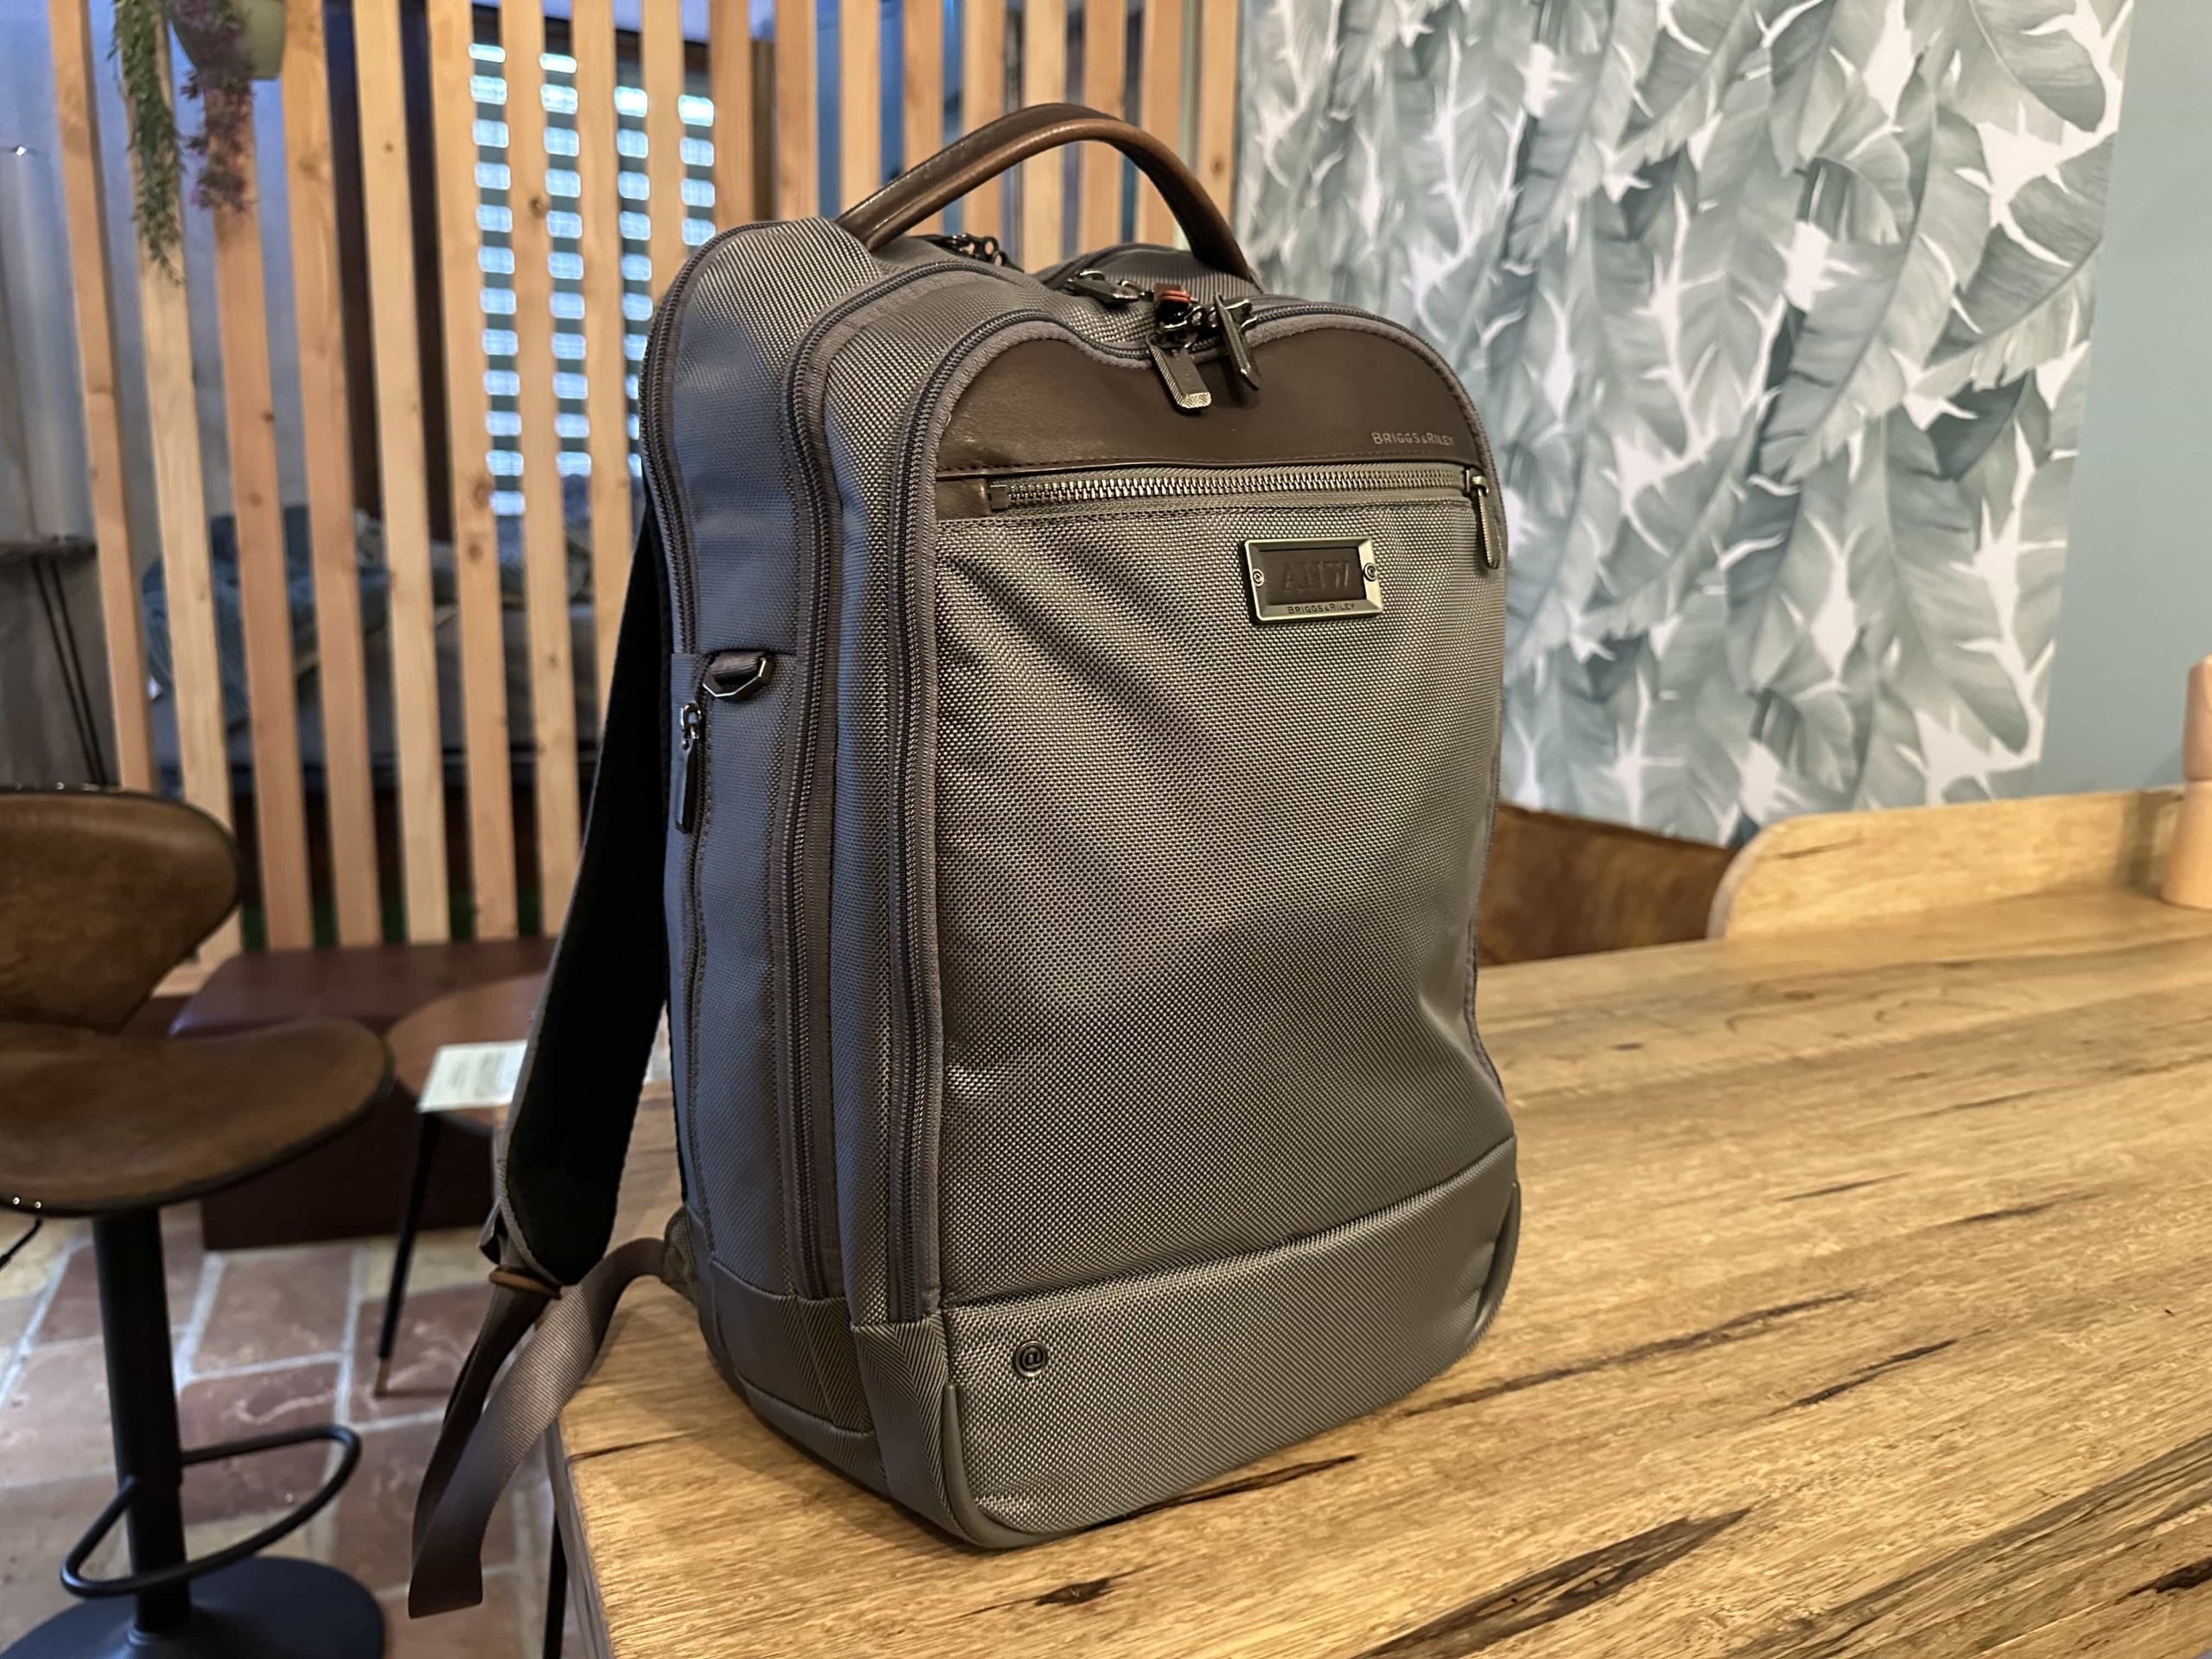 A fully-packed backpack on top of a kitchen countertop